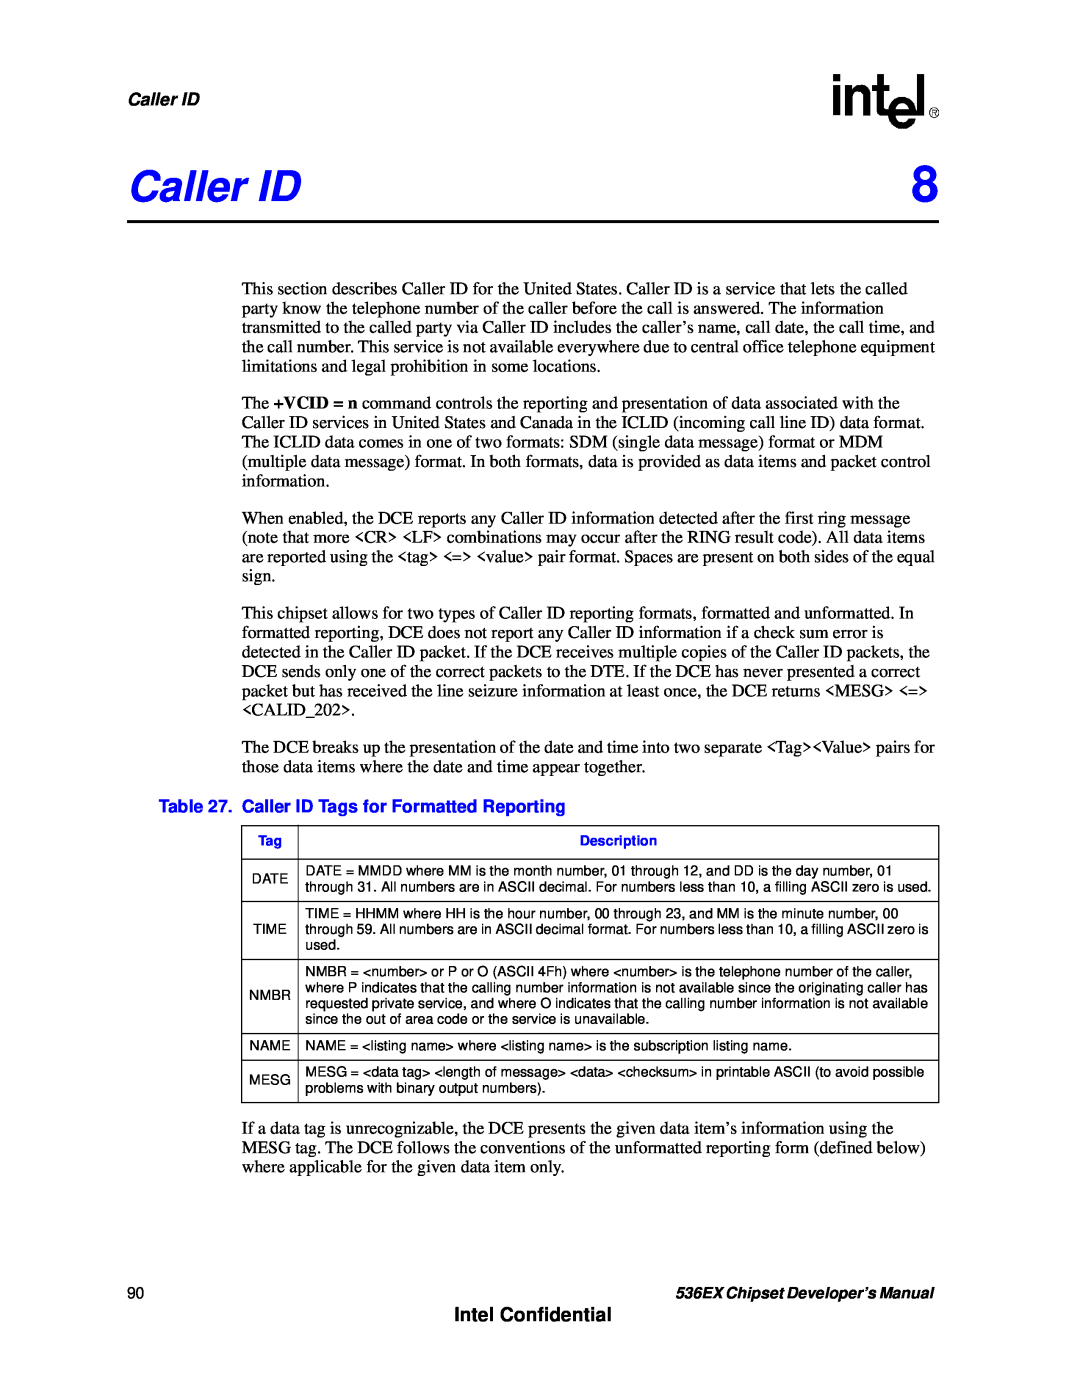 Intel 536EX manual Intel Confidential, Caller ID Tags for Formatted Reporting 